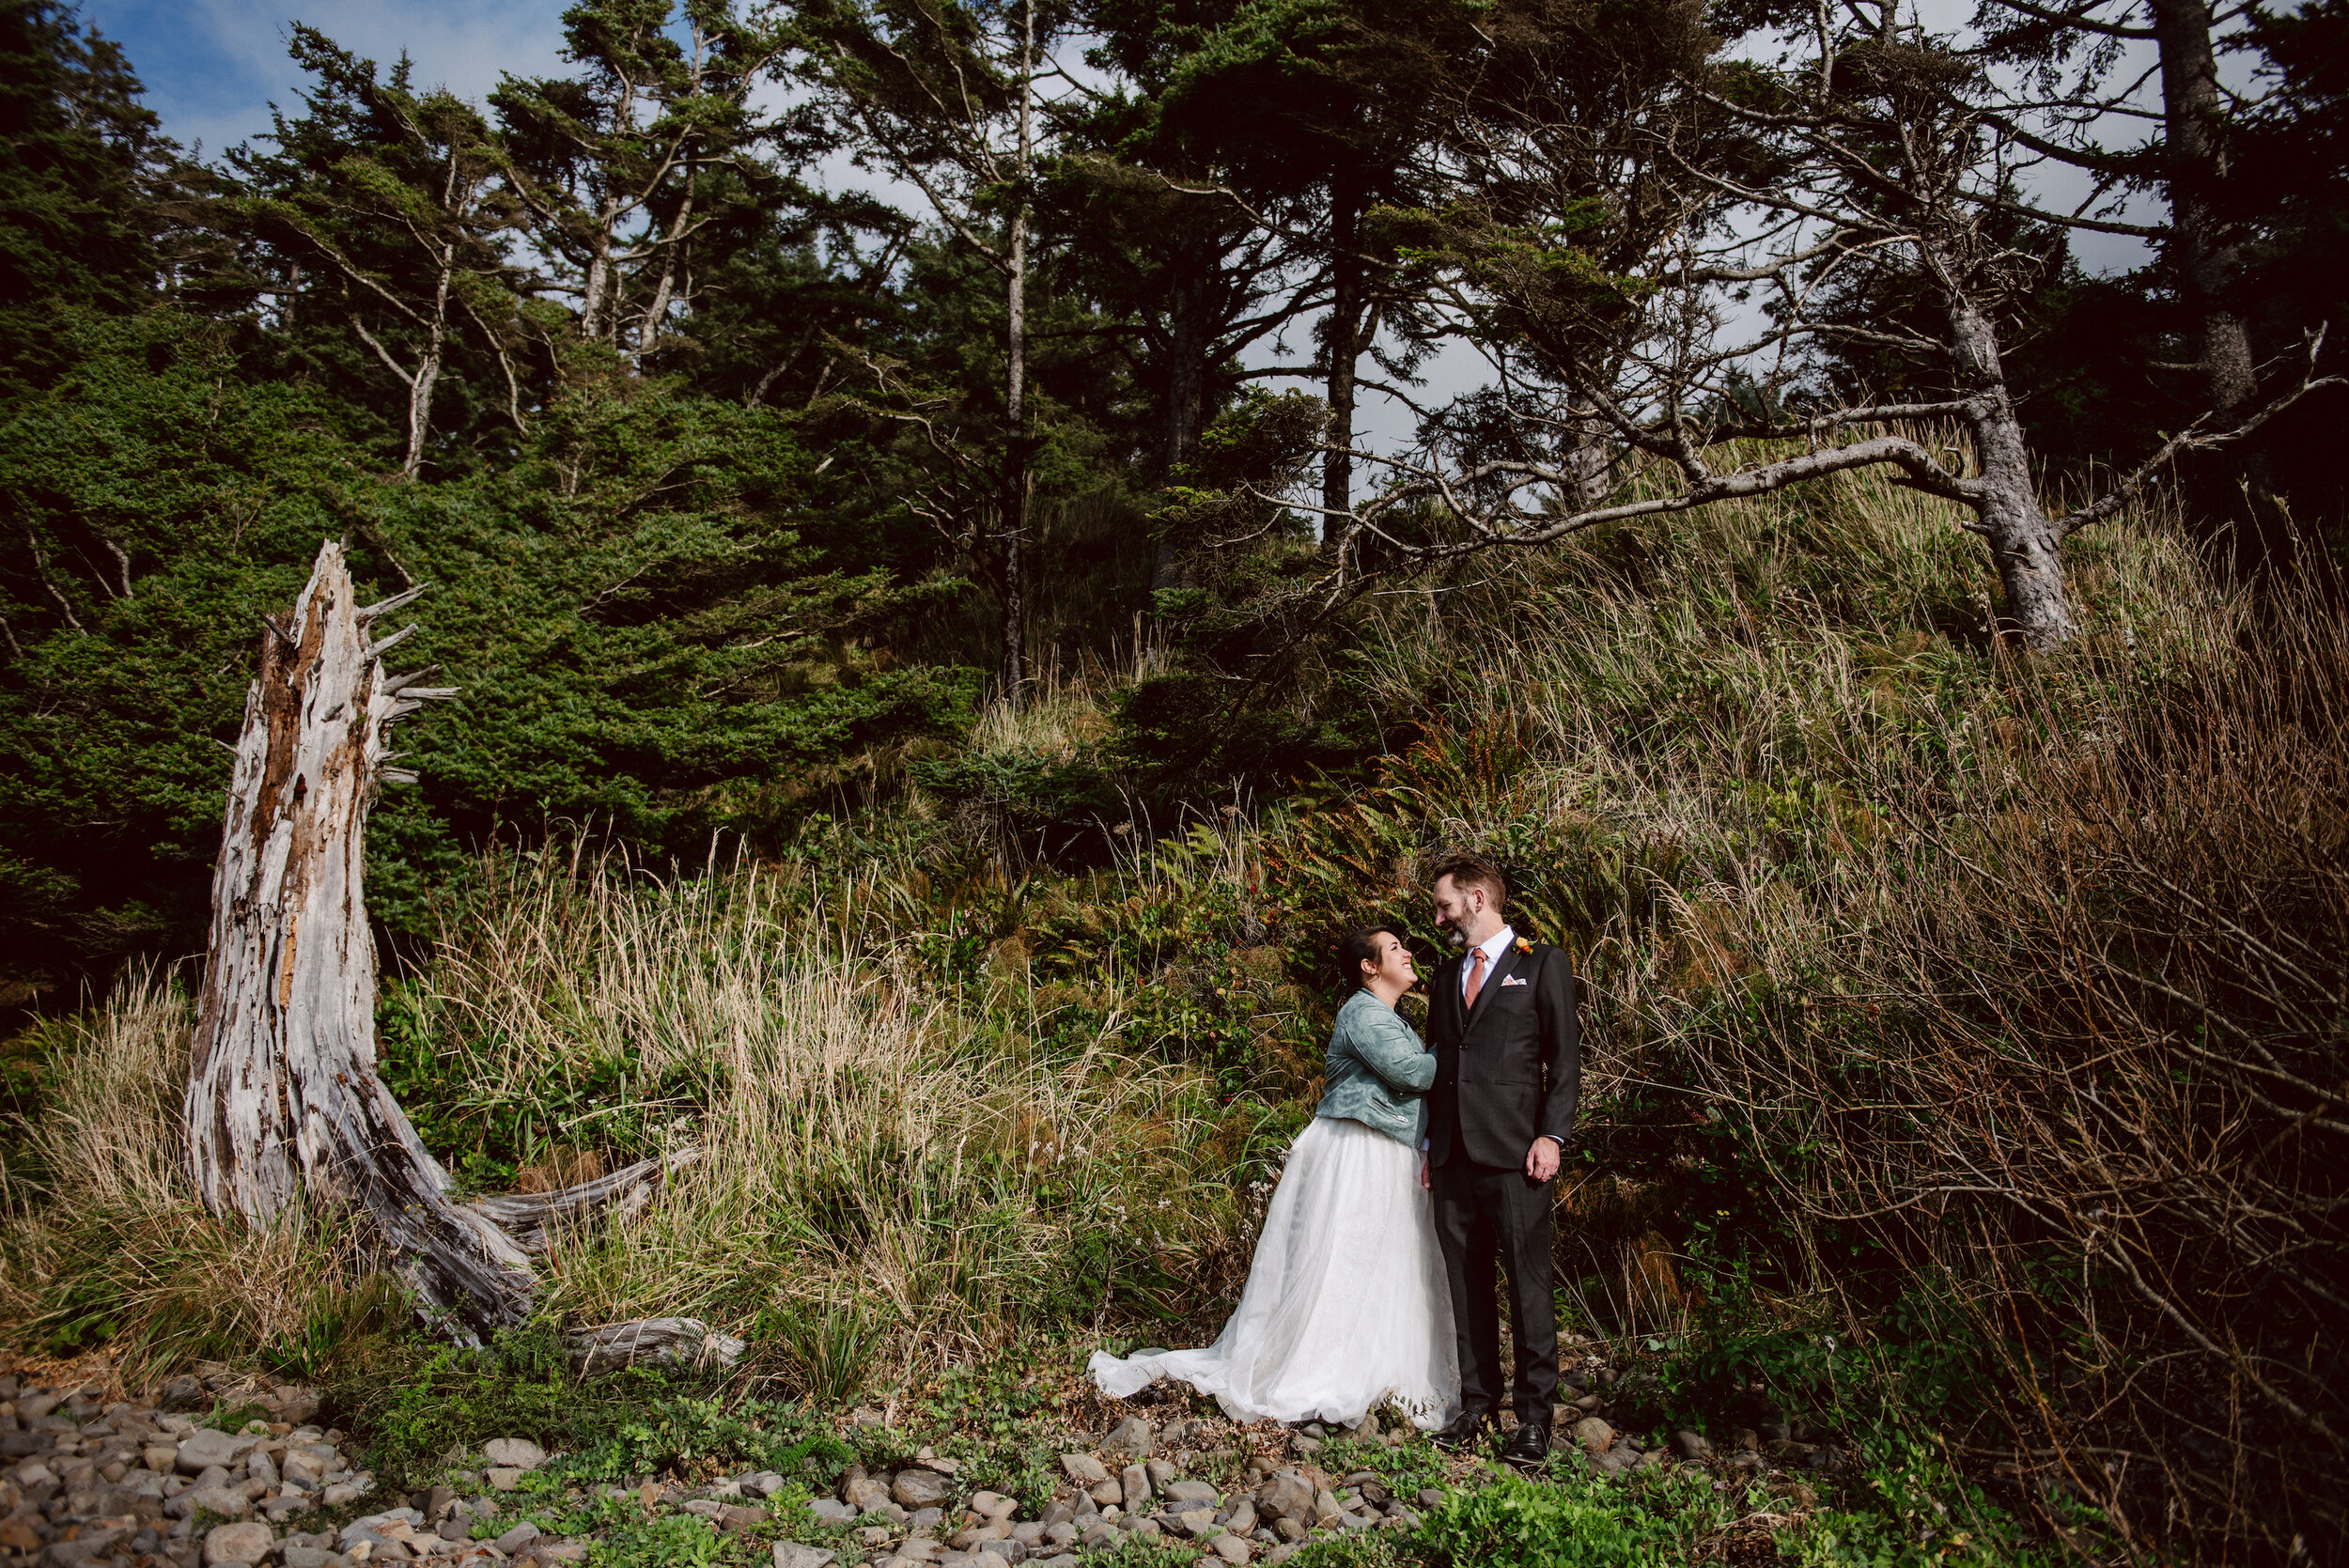 Bride in a white dress with a jean jacket cuddles the arm of a groom in a black suit while they smile at each other and stand in front of a fairytale like forest scene at the Oregon Coast